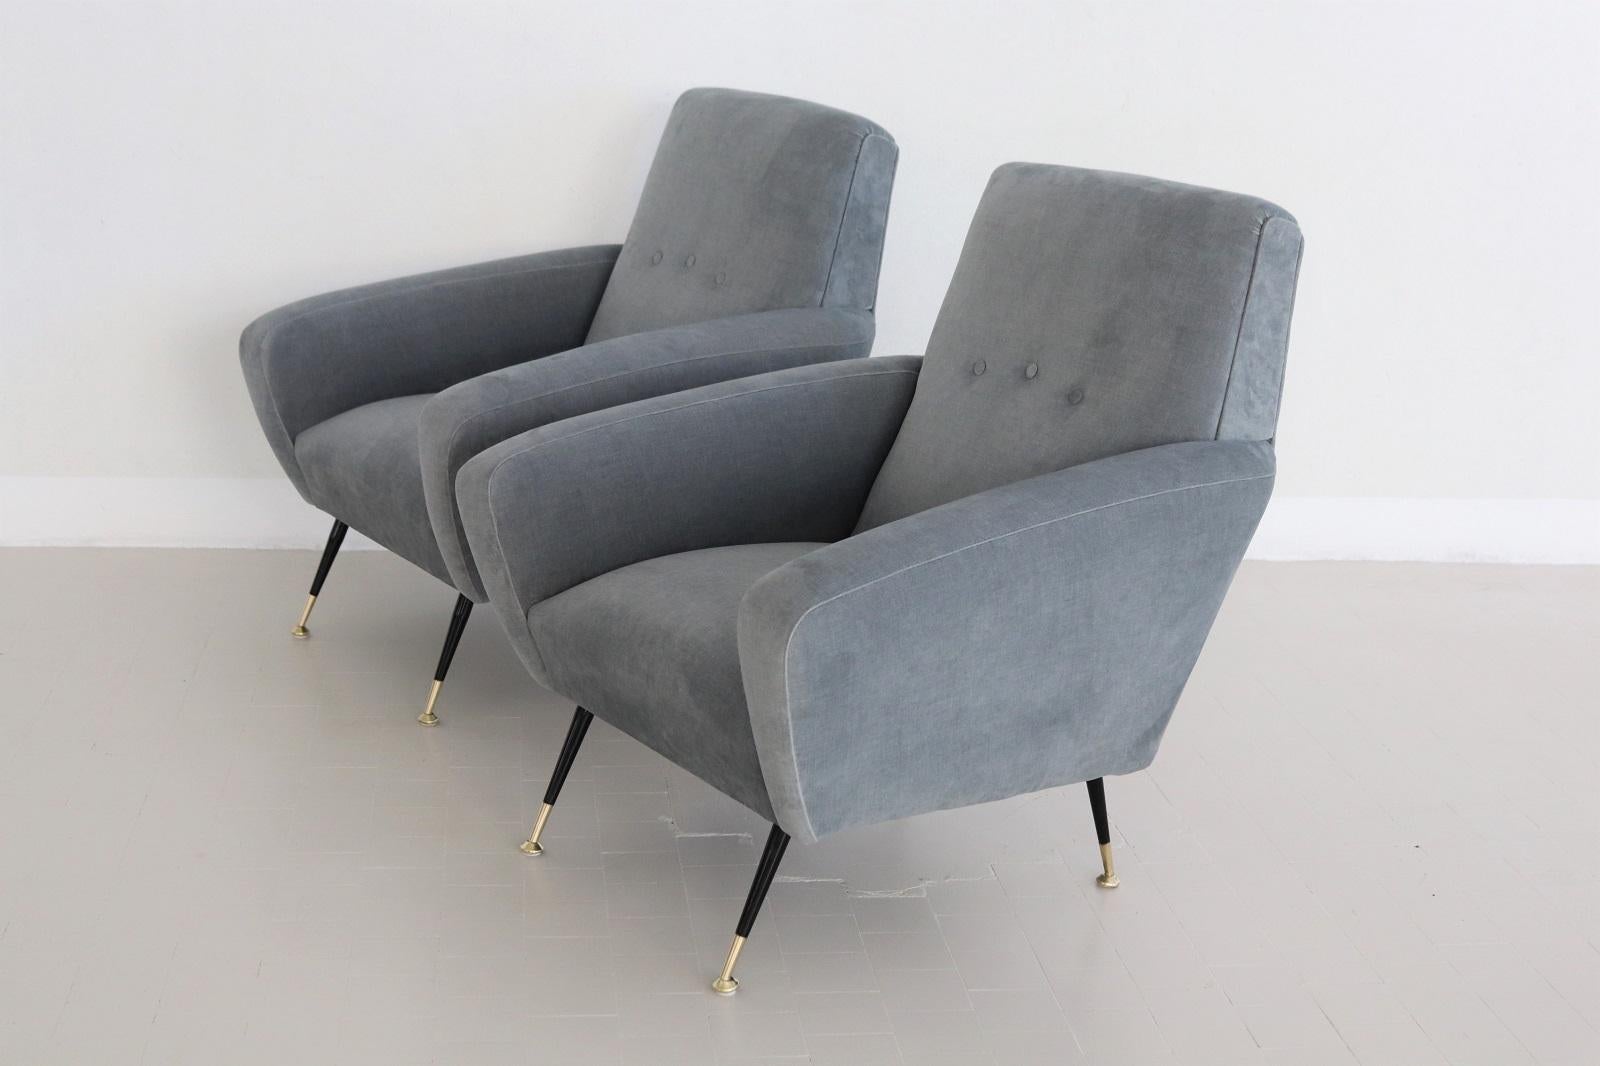 Magnificent pair of original Italian armchairs with brass tips from the mid-century, 1950s.
The armchairs are equipped with springs inside for a soft and springy comfortable sitting of great quality.
Completely refurbished with quality material and